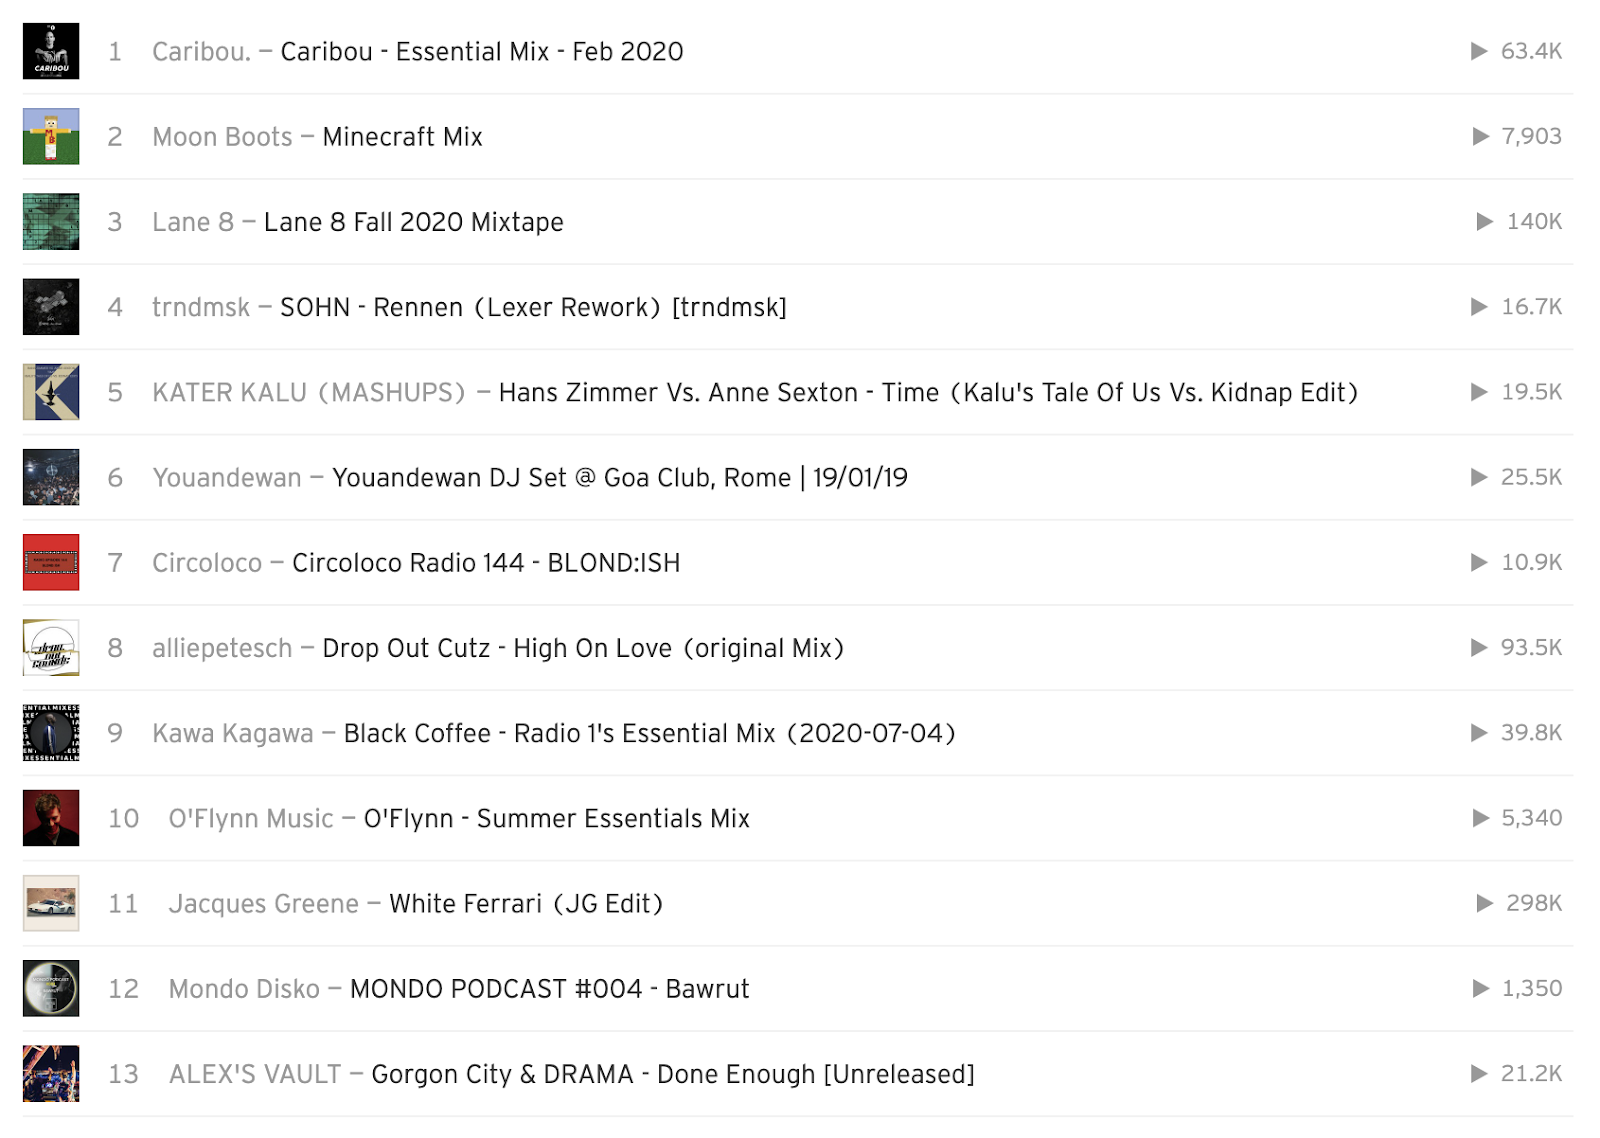 Screenshot of top 13 tracks in SoundCloud, with Jacques Greene - White Ferrari (JG Edit) listed as the 11th track. 